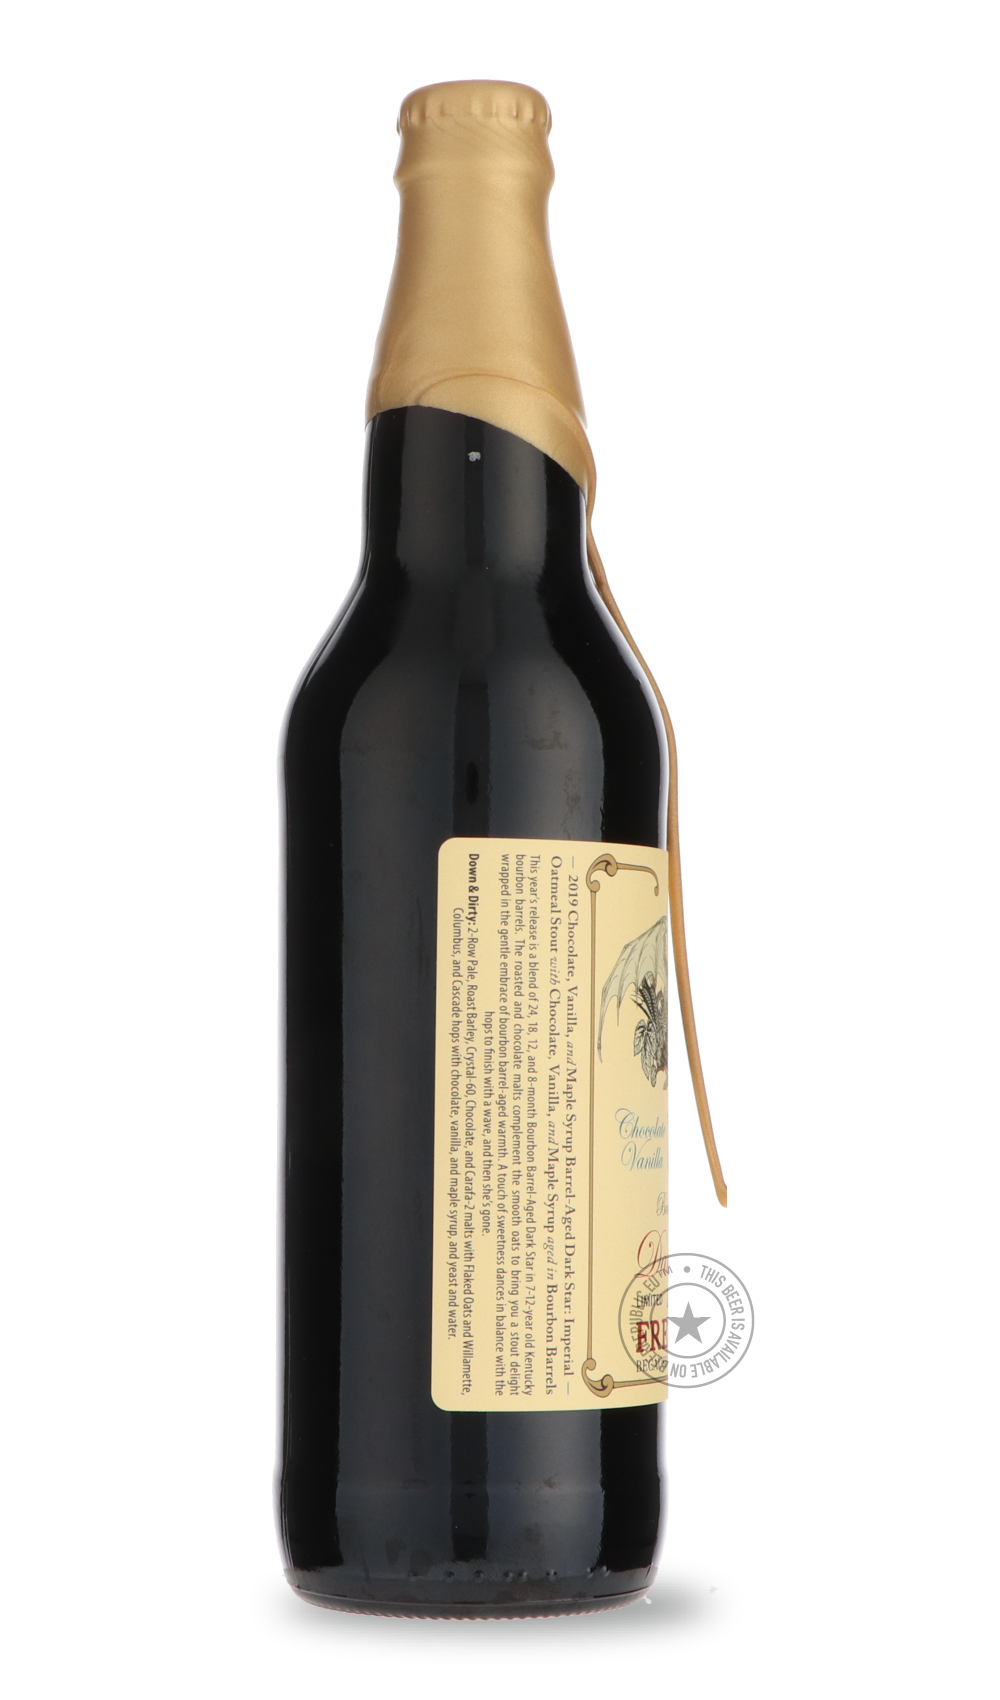 -Fremont- Bourbon Barrel Aged Dark Star: Chocolate Vanilla Maple Syrup 2019-Stout & Porter- Only @ Beer Republic - The best online beer store for American & Canadian craft beer - Buy beer online from the USA and Canada - Bier online kopen - Amerikaans bier kopen - Craft beer store - Craft beer kopen - Amerikanisch bier kaufen - Bier online kaufen - Acheter biere online - IPA - Stout - Porter - New England IPA - Hazy IPA - Imperial Stout - Barrel Aged - Barrel Aged Imperial Stout - Brown - Dark beer - Blond 